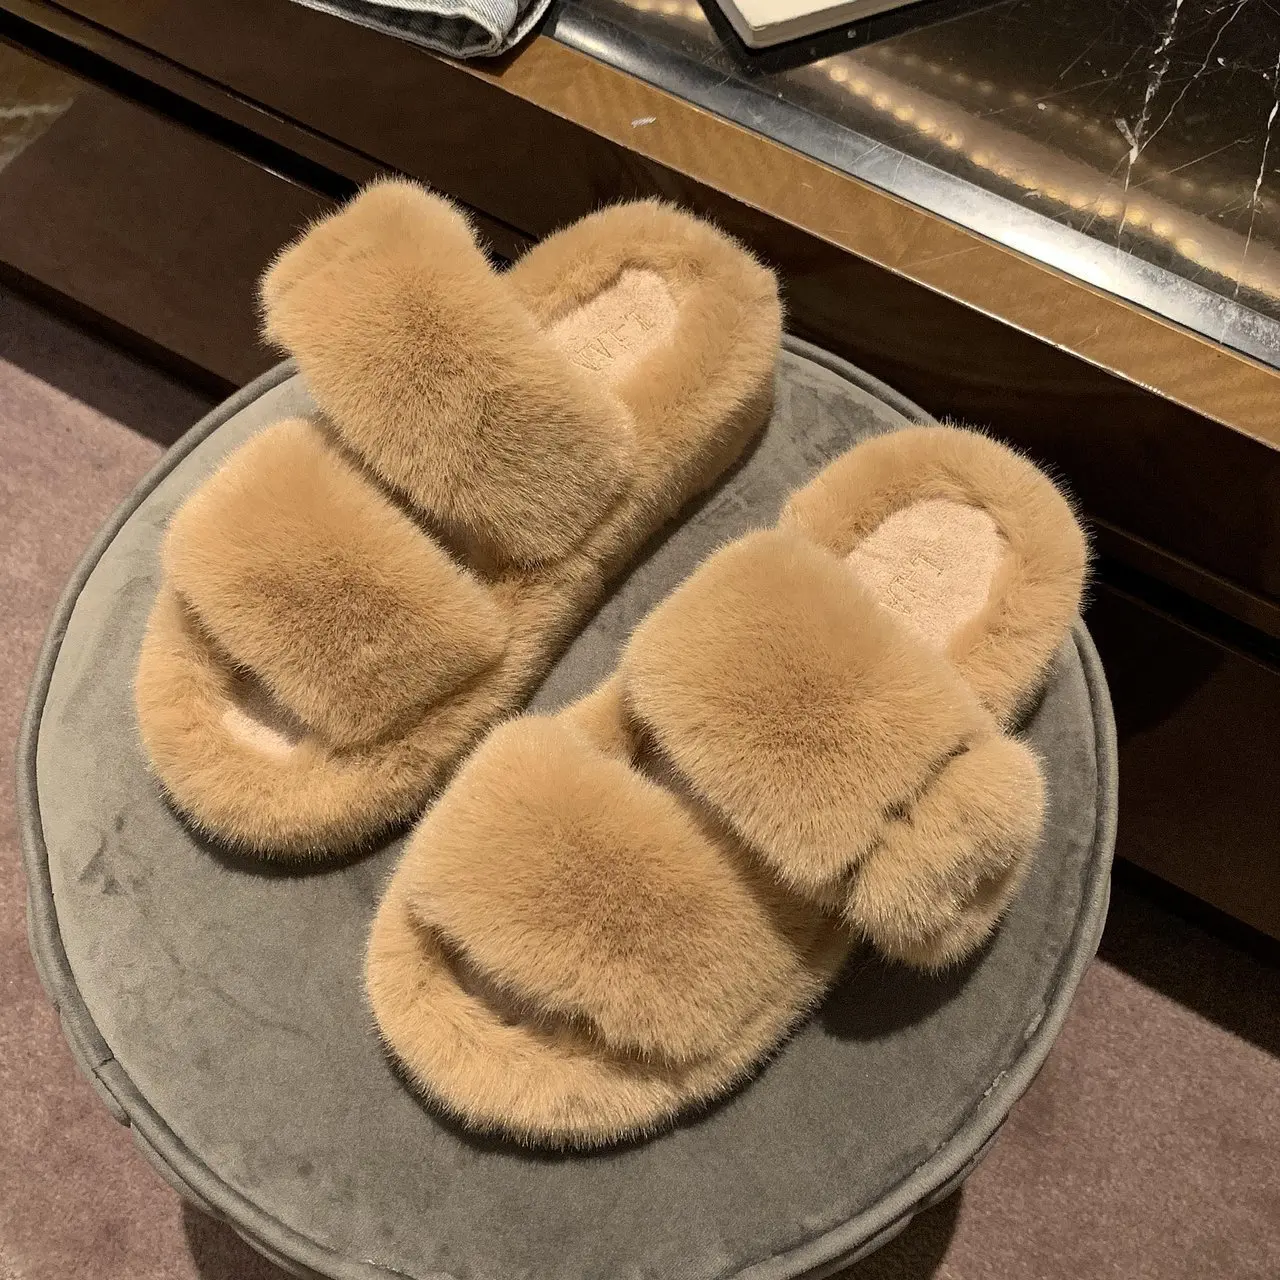 

Women's Fashion Soft Indoor Home Fluffy Fuzzy Sheep Skin Slippers Real Wool Fur Sheepskin Open Toe Fur Slides Slippers, As picture shown